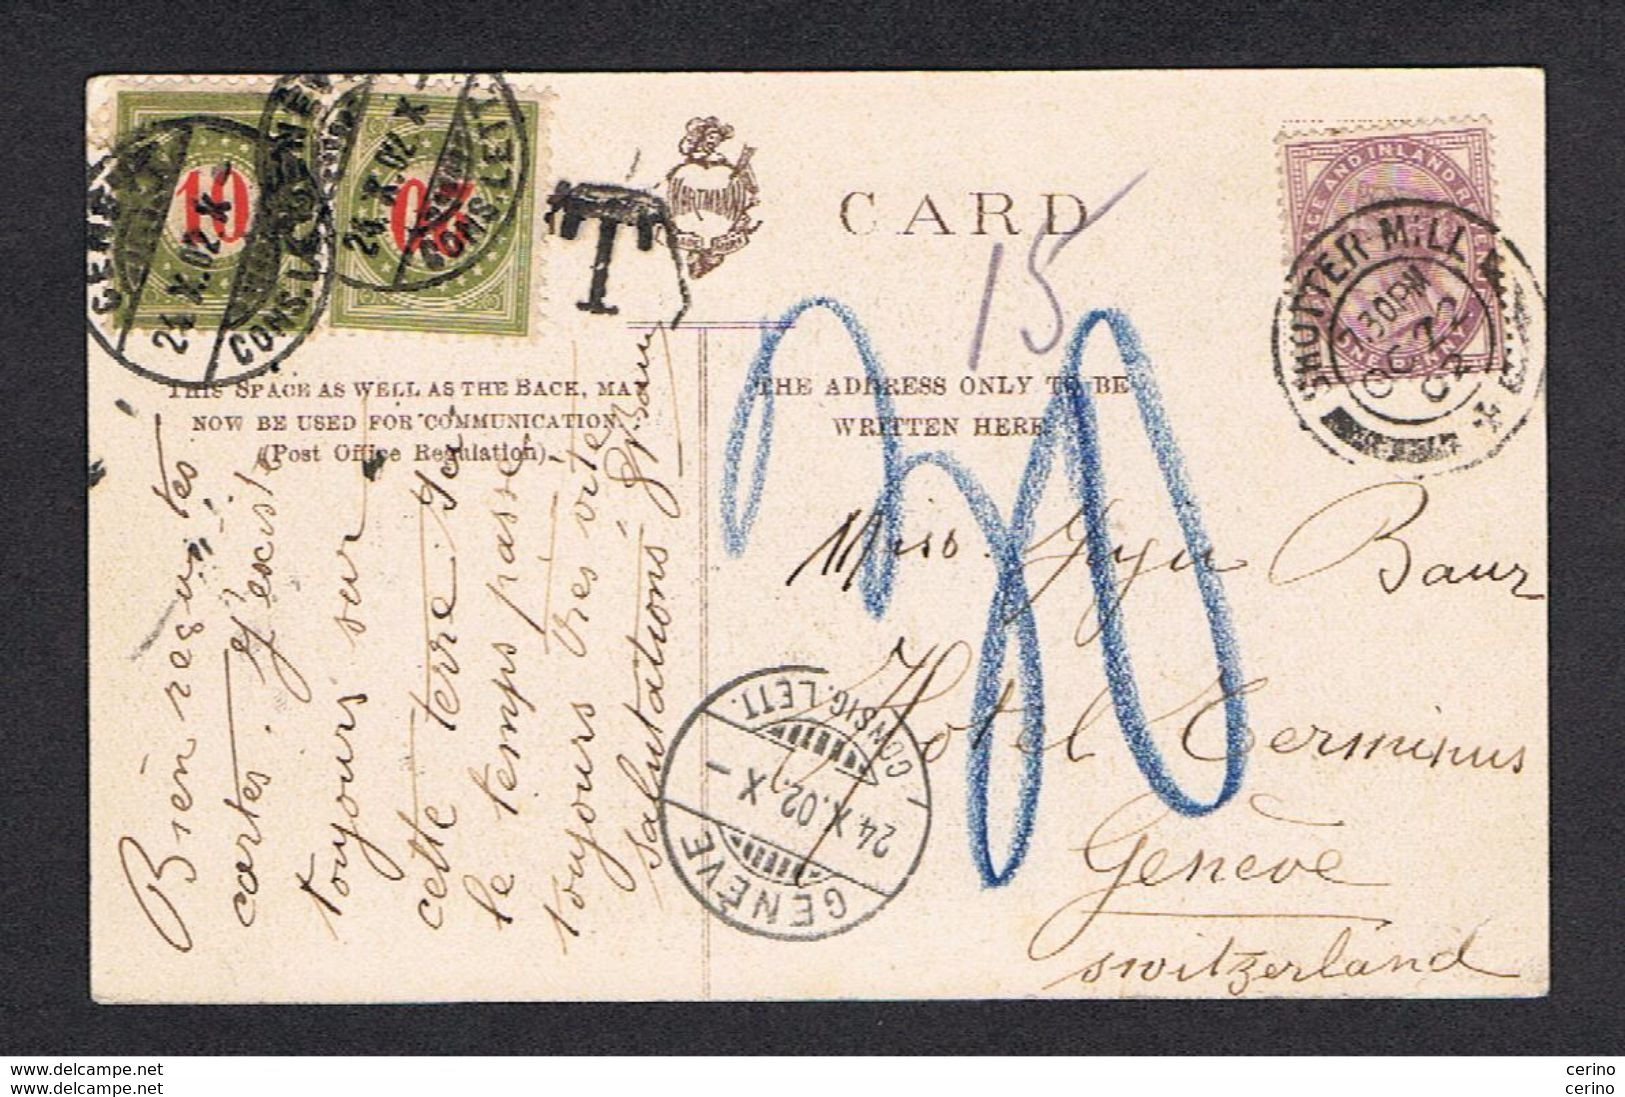 GREAT  BRITAIN:  VICTORIA  ONE  PENNY  ON  POSTCARD  TO  SWITZERLAND  -  TAXED  IN  ARRIVAL  -  FP - Briefe U. Dokumente